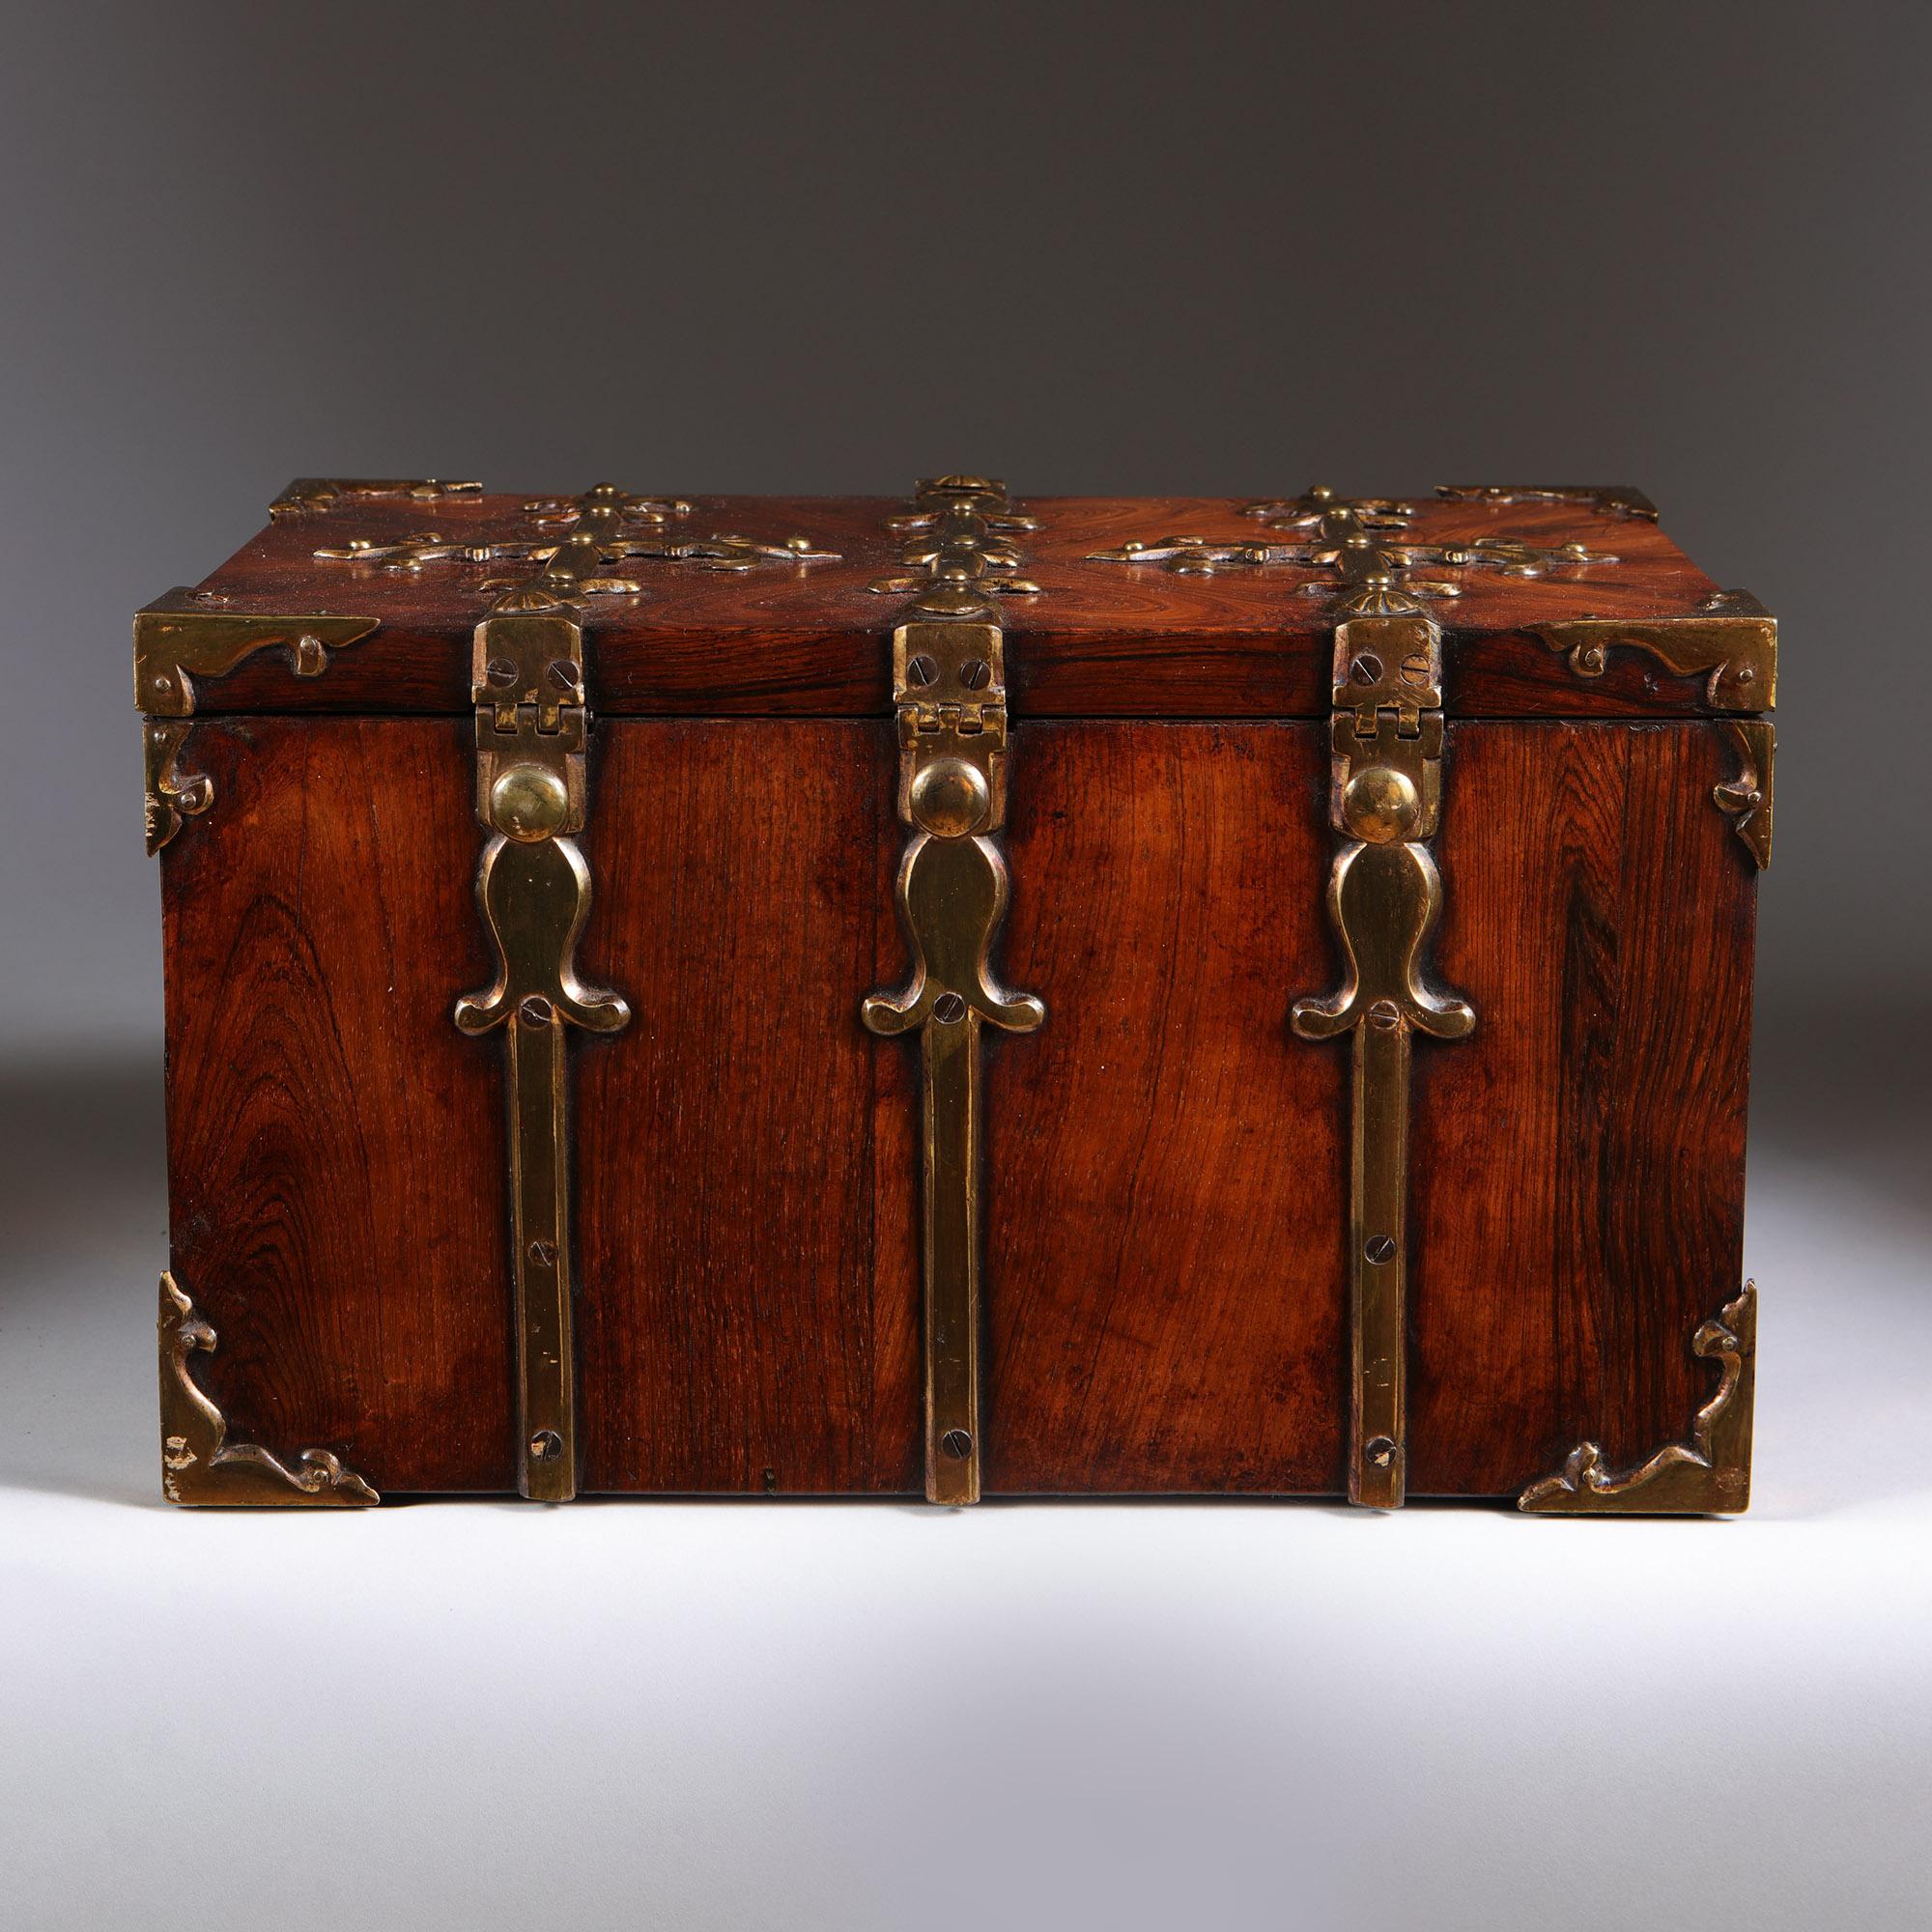 A Fine 17th Century William and Mary Kingwood Strongbox or Coffre Fort, Circa 1690 3